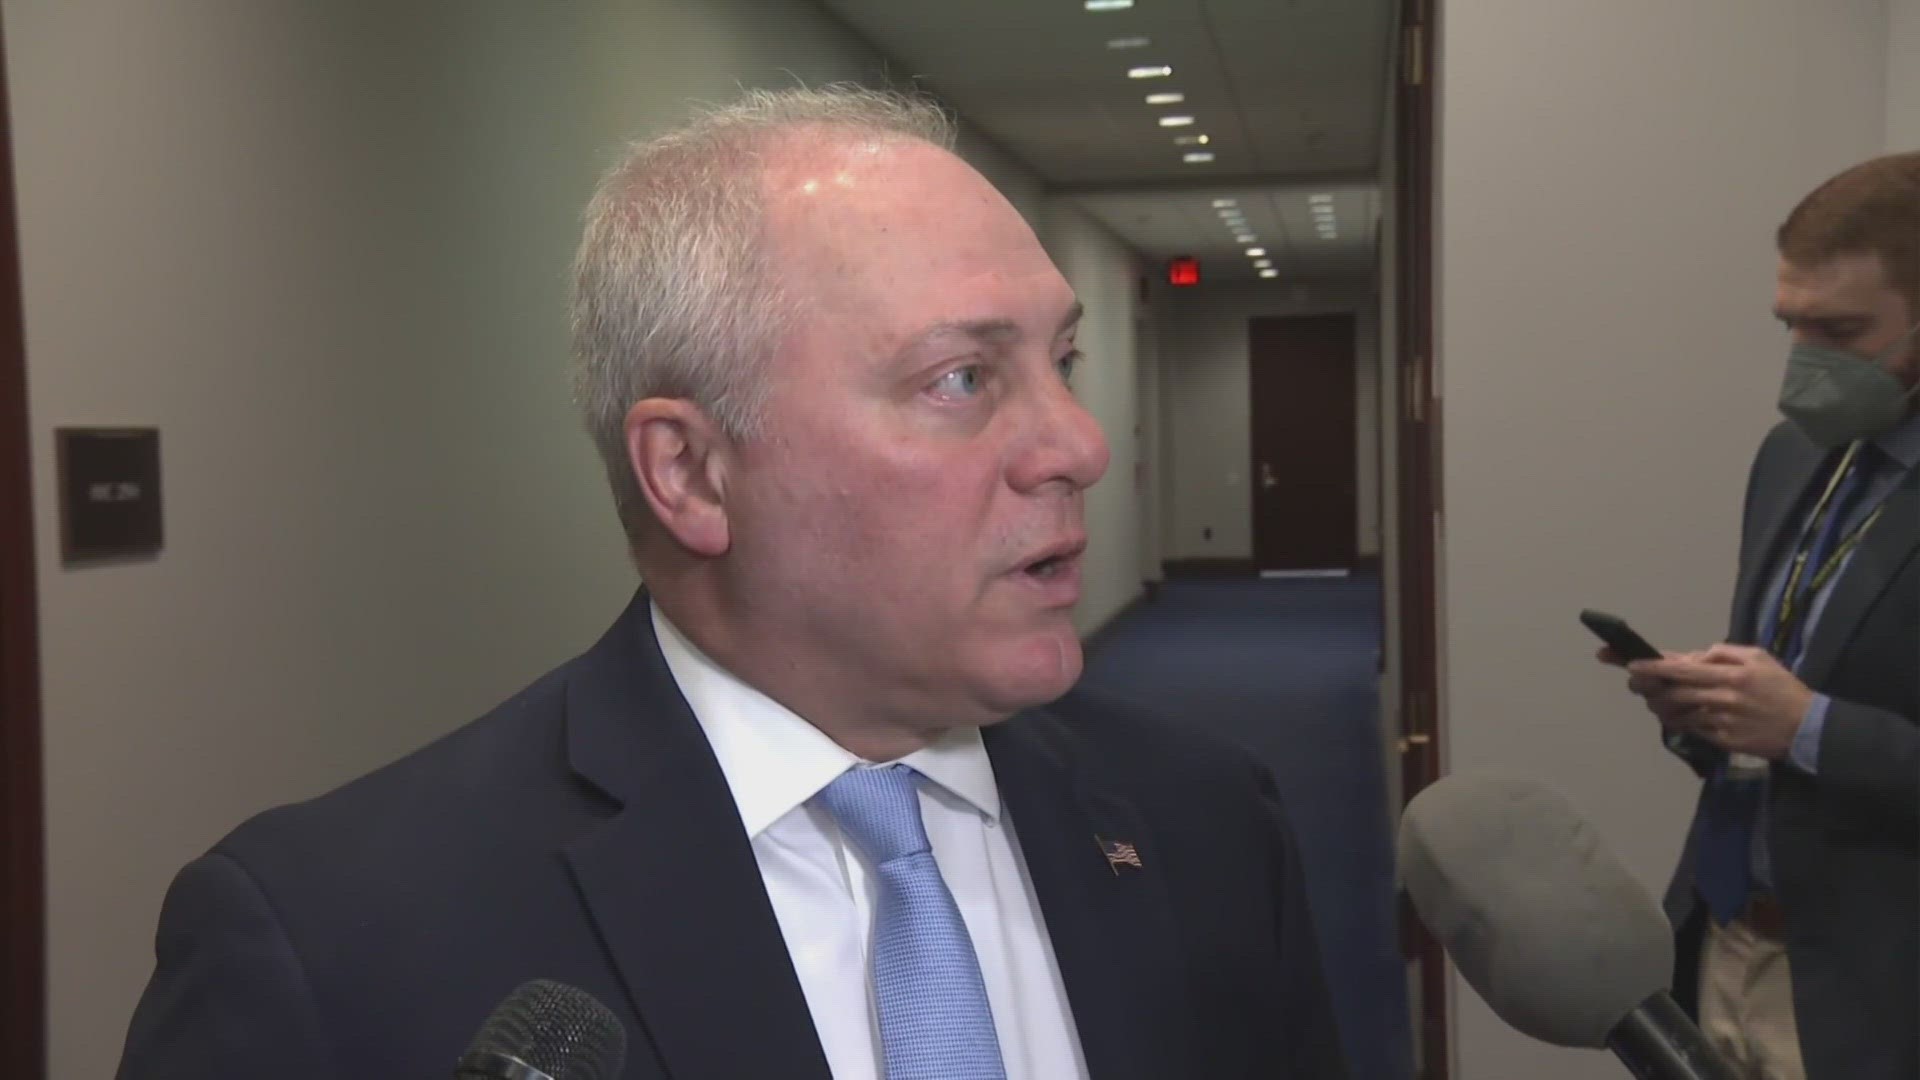 Scalise says he has begun treatment and expects to continue working as Majority Leader and serving the people of Louisiana’s First Congressional District.